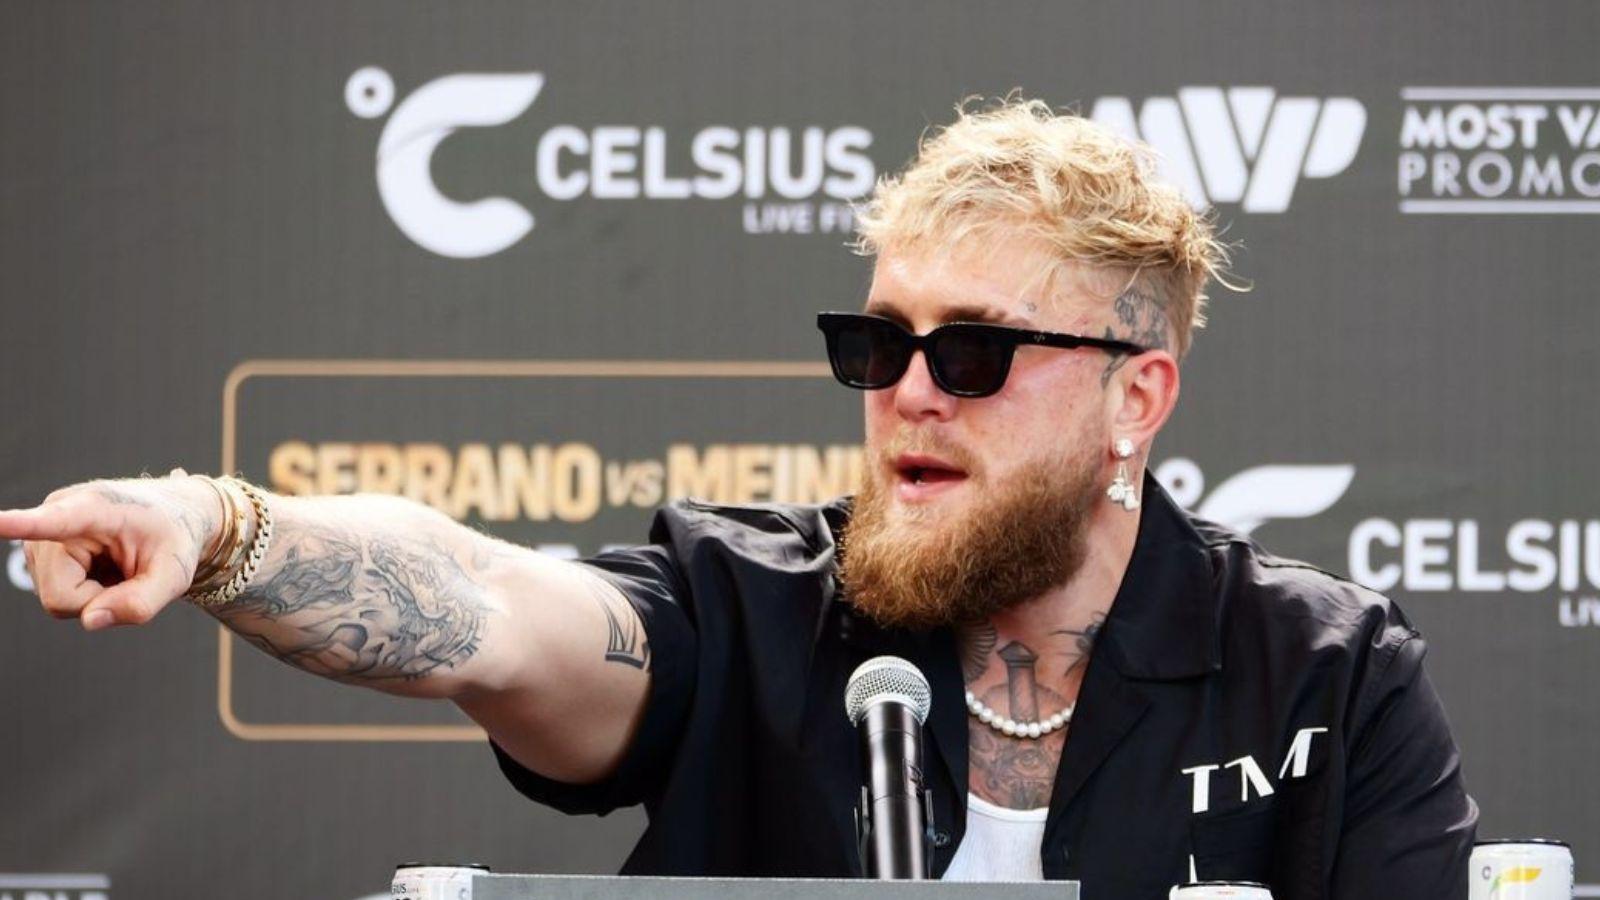 Jake Paul recently confirmed that he offered Jorge Masvidal $10 million for an MMA fight. But the UFC won’t allow it.